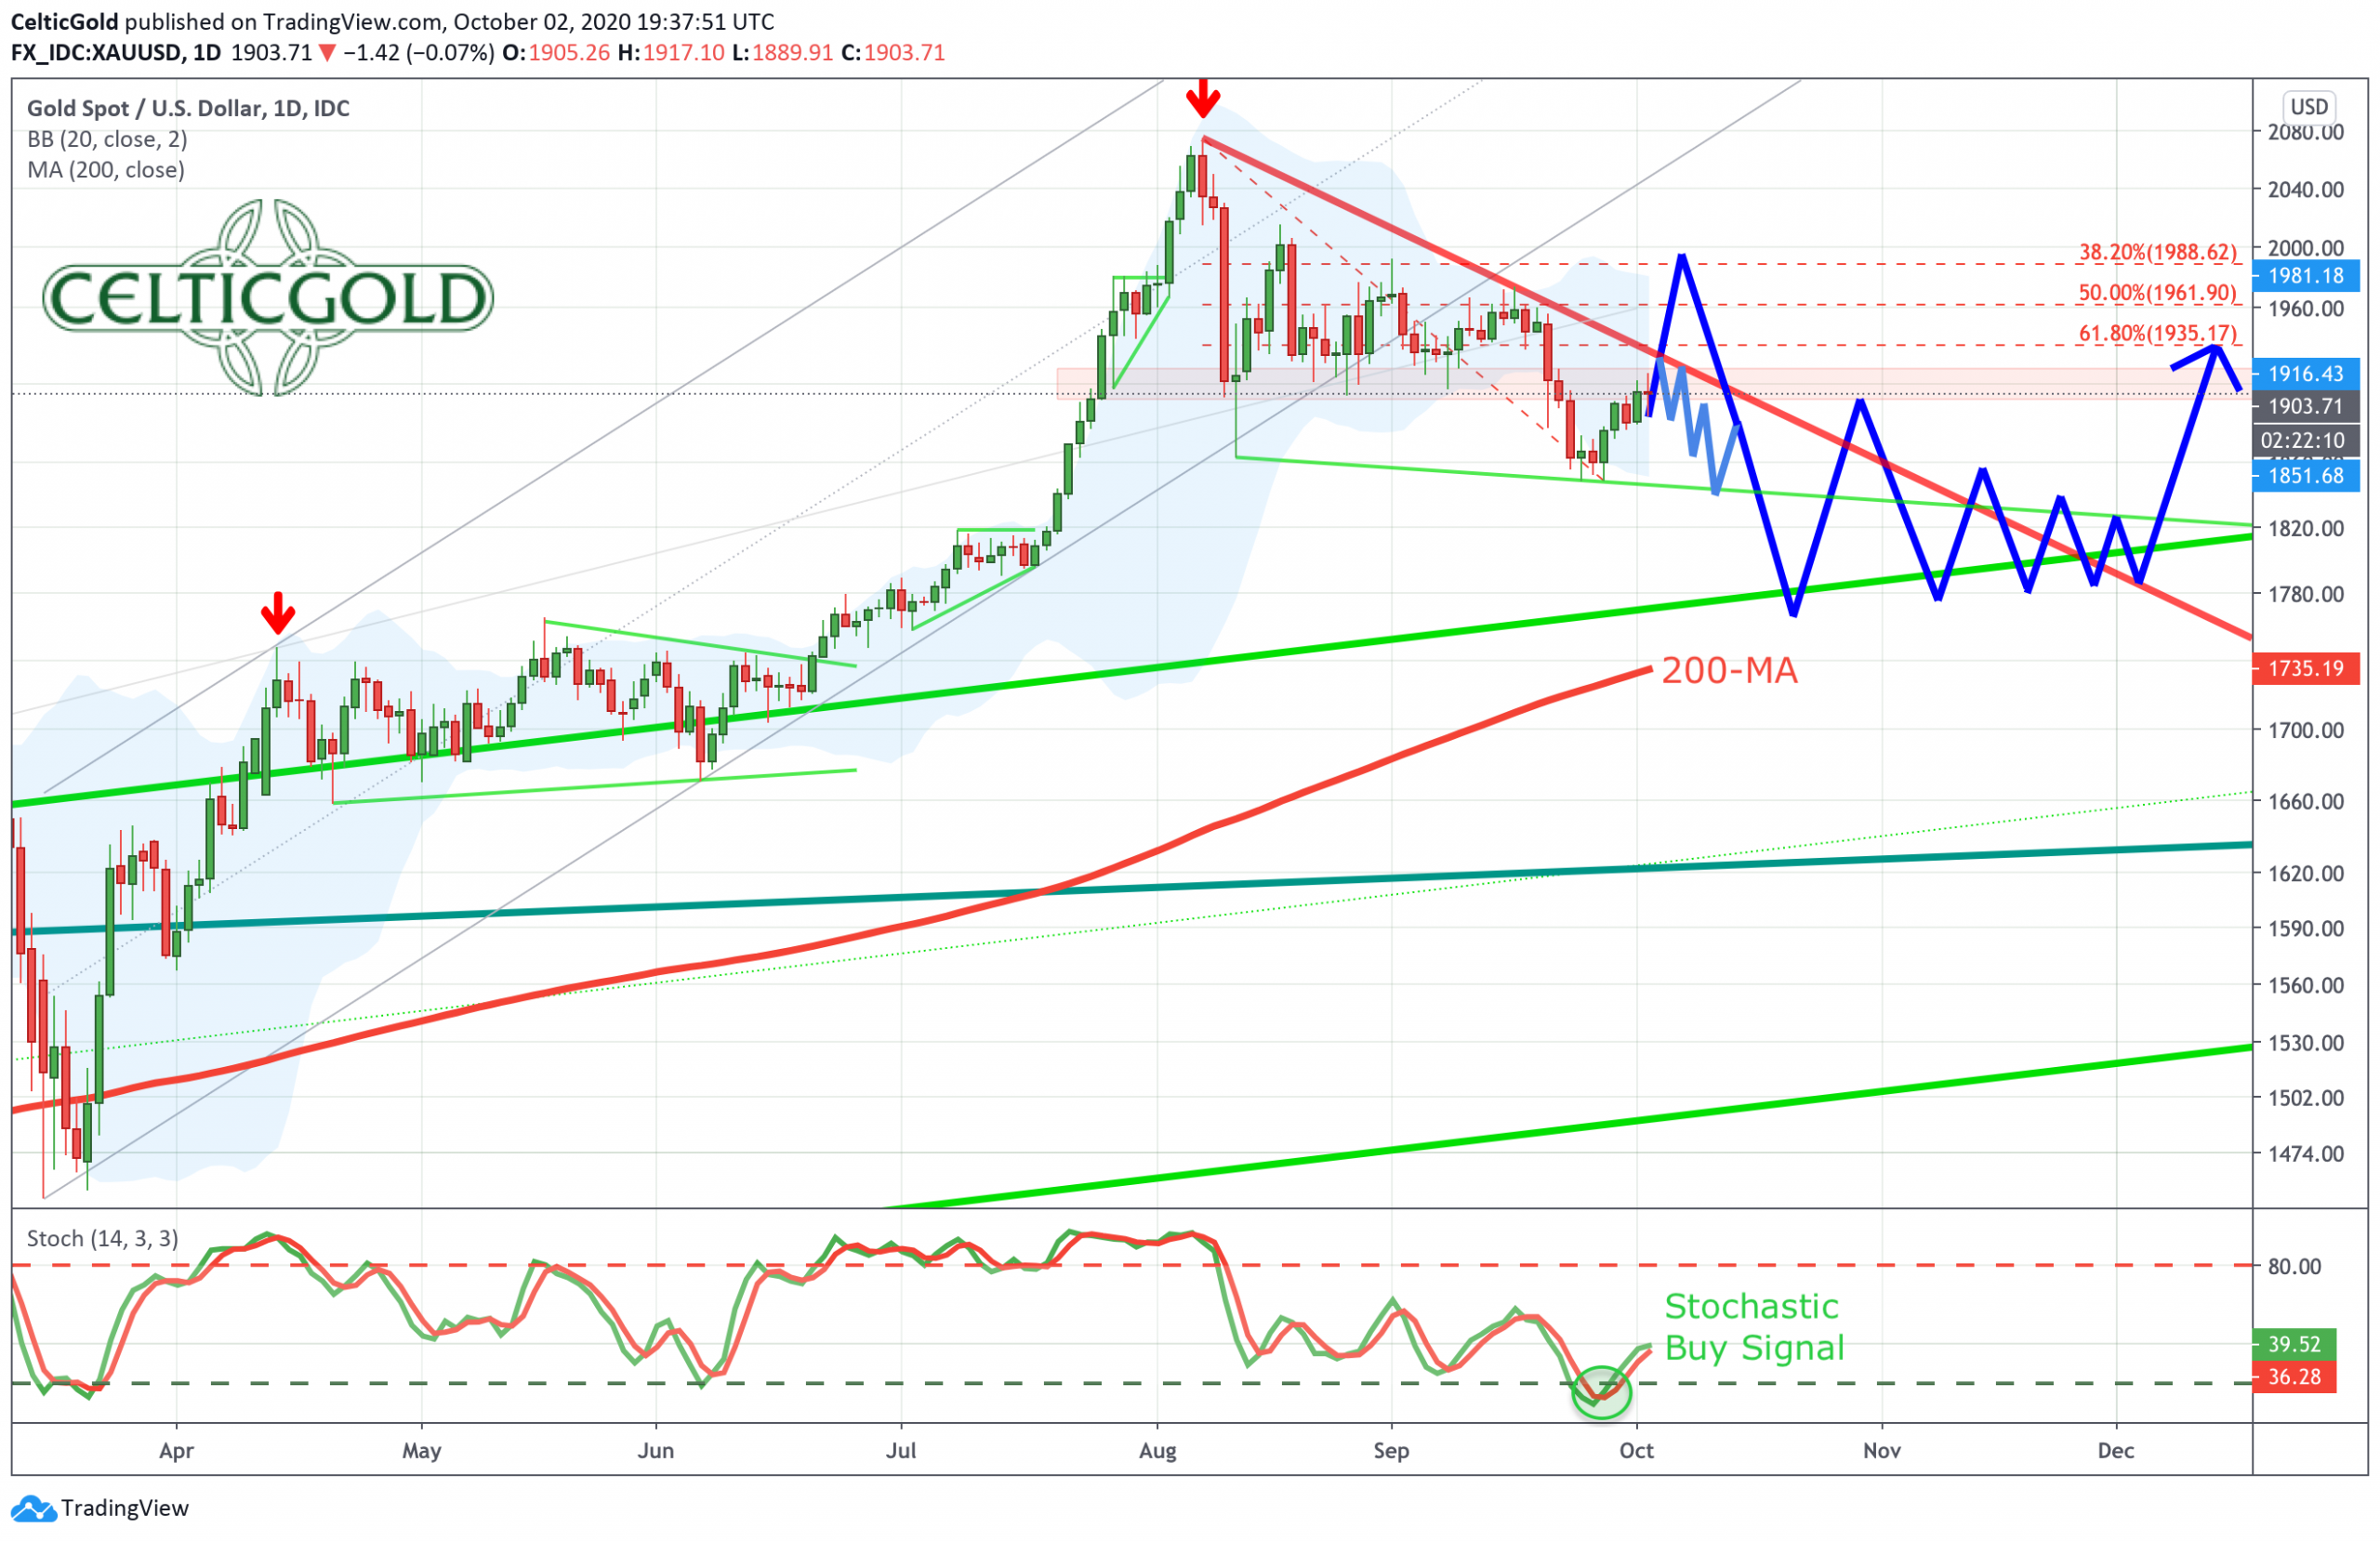 Gold in US-Dollars, daily chart as of October 2nd, 2020. Source: Tradingview